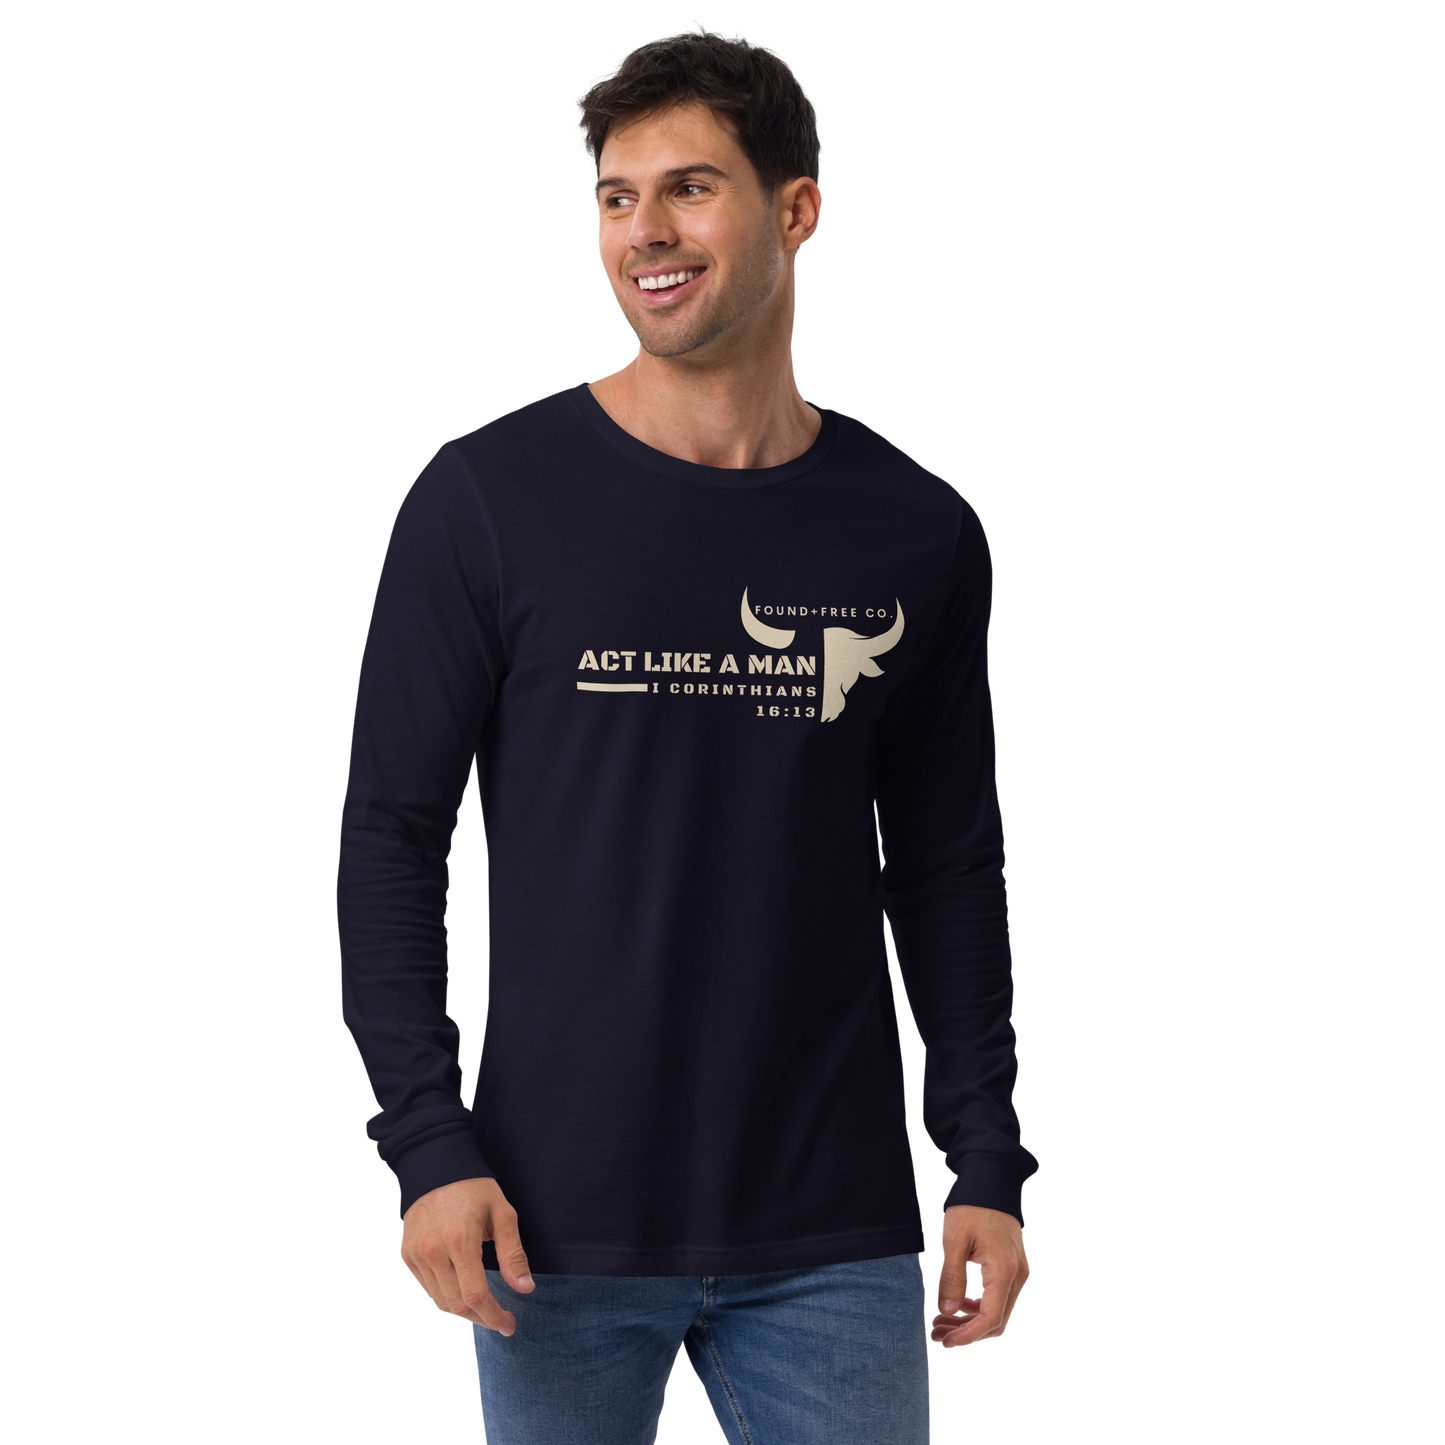 Act Like A Man Men's Long Sleeve Tee Relevant